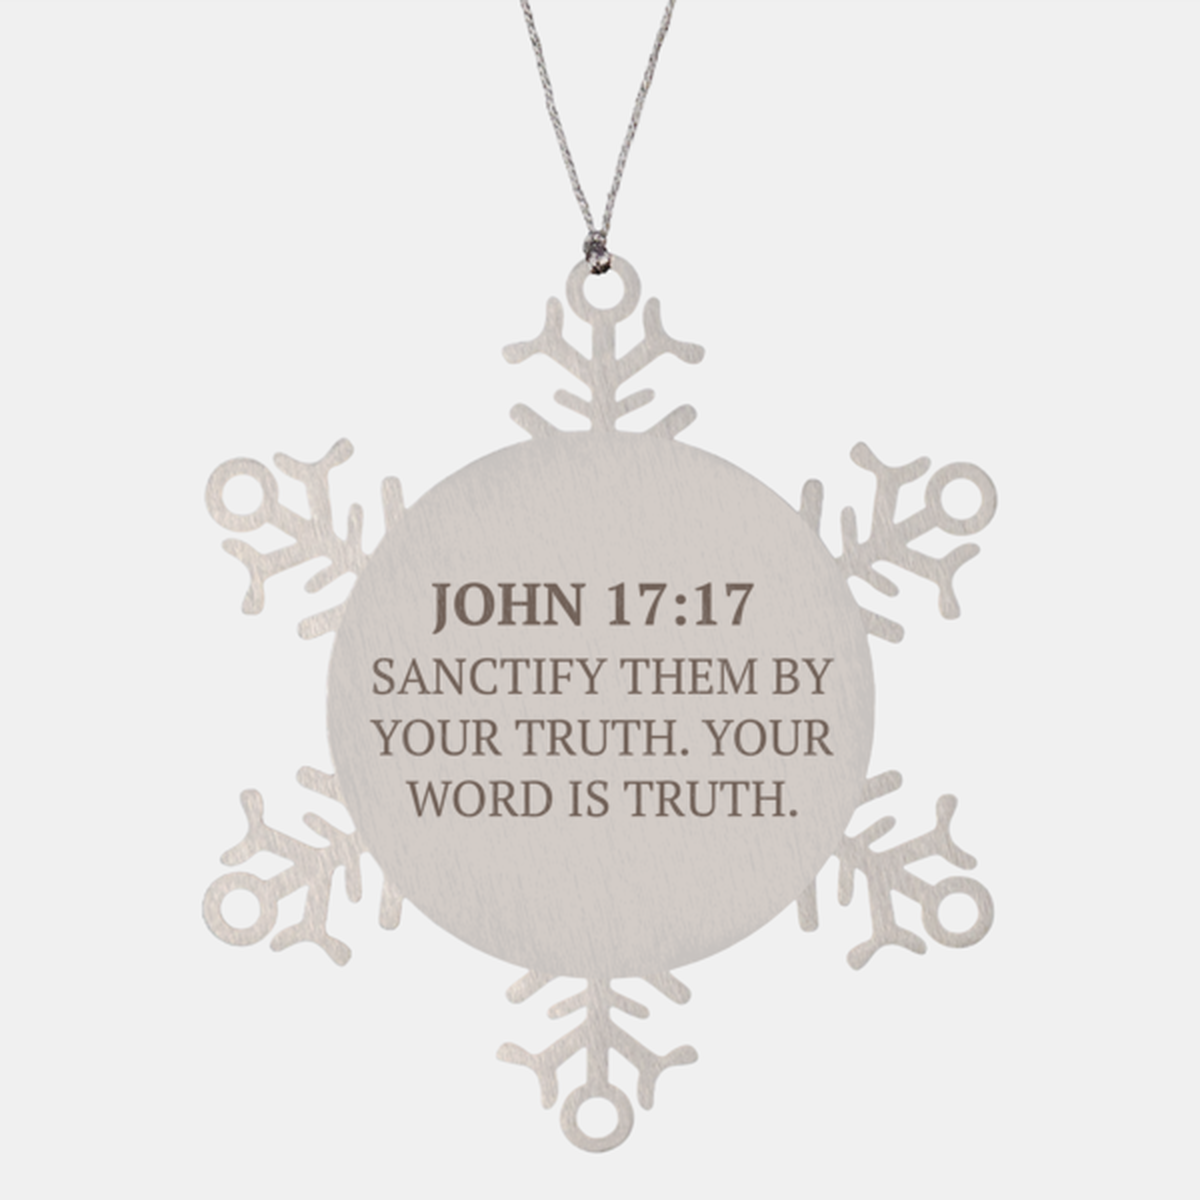 Christian Ornaments For Christmas Tree, Sanctify Them By Your Truth. Your Word Is Truth, Religious Christmas Decorations, Scripture Ornaments Gifts, Bible Verse Ornament